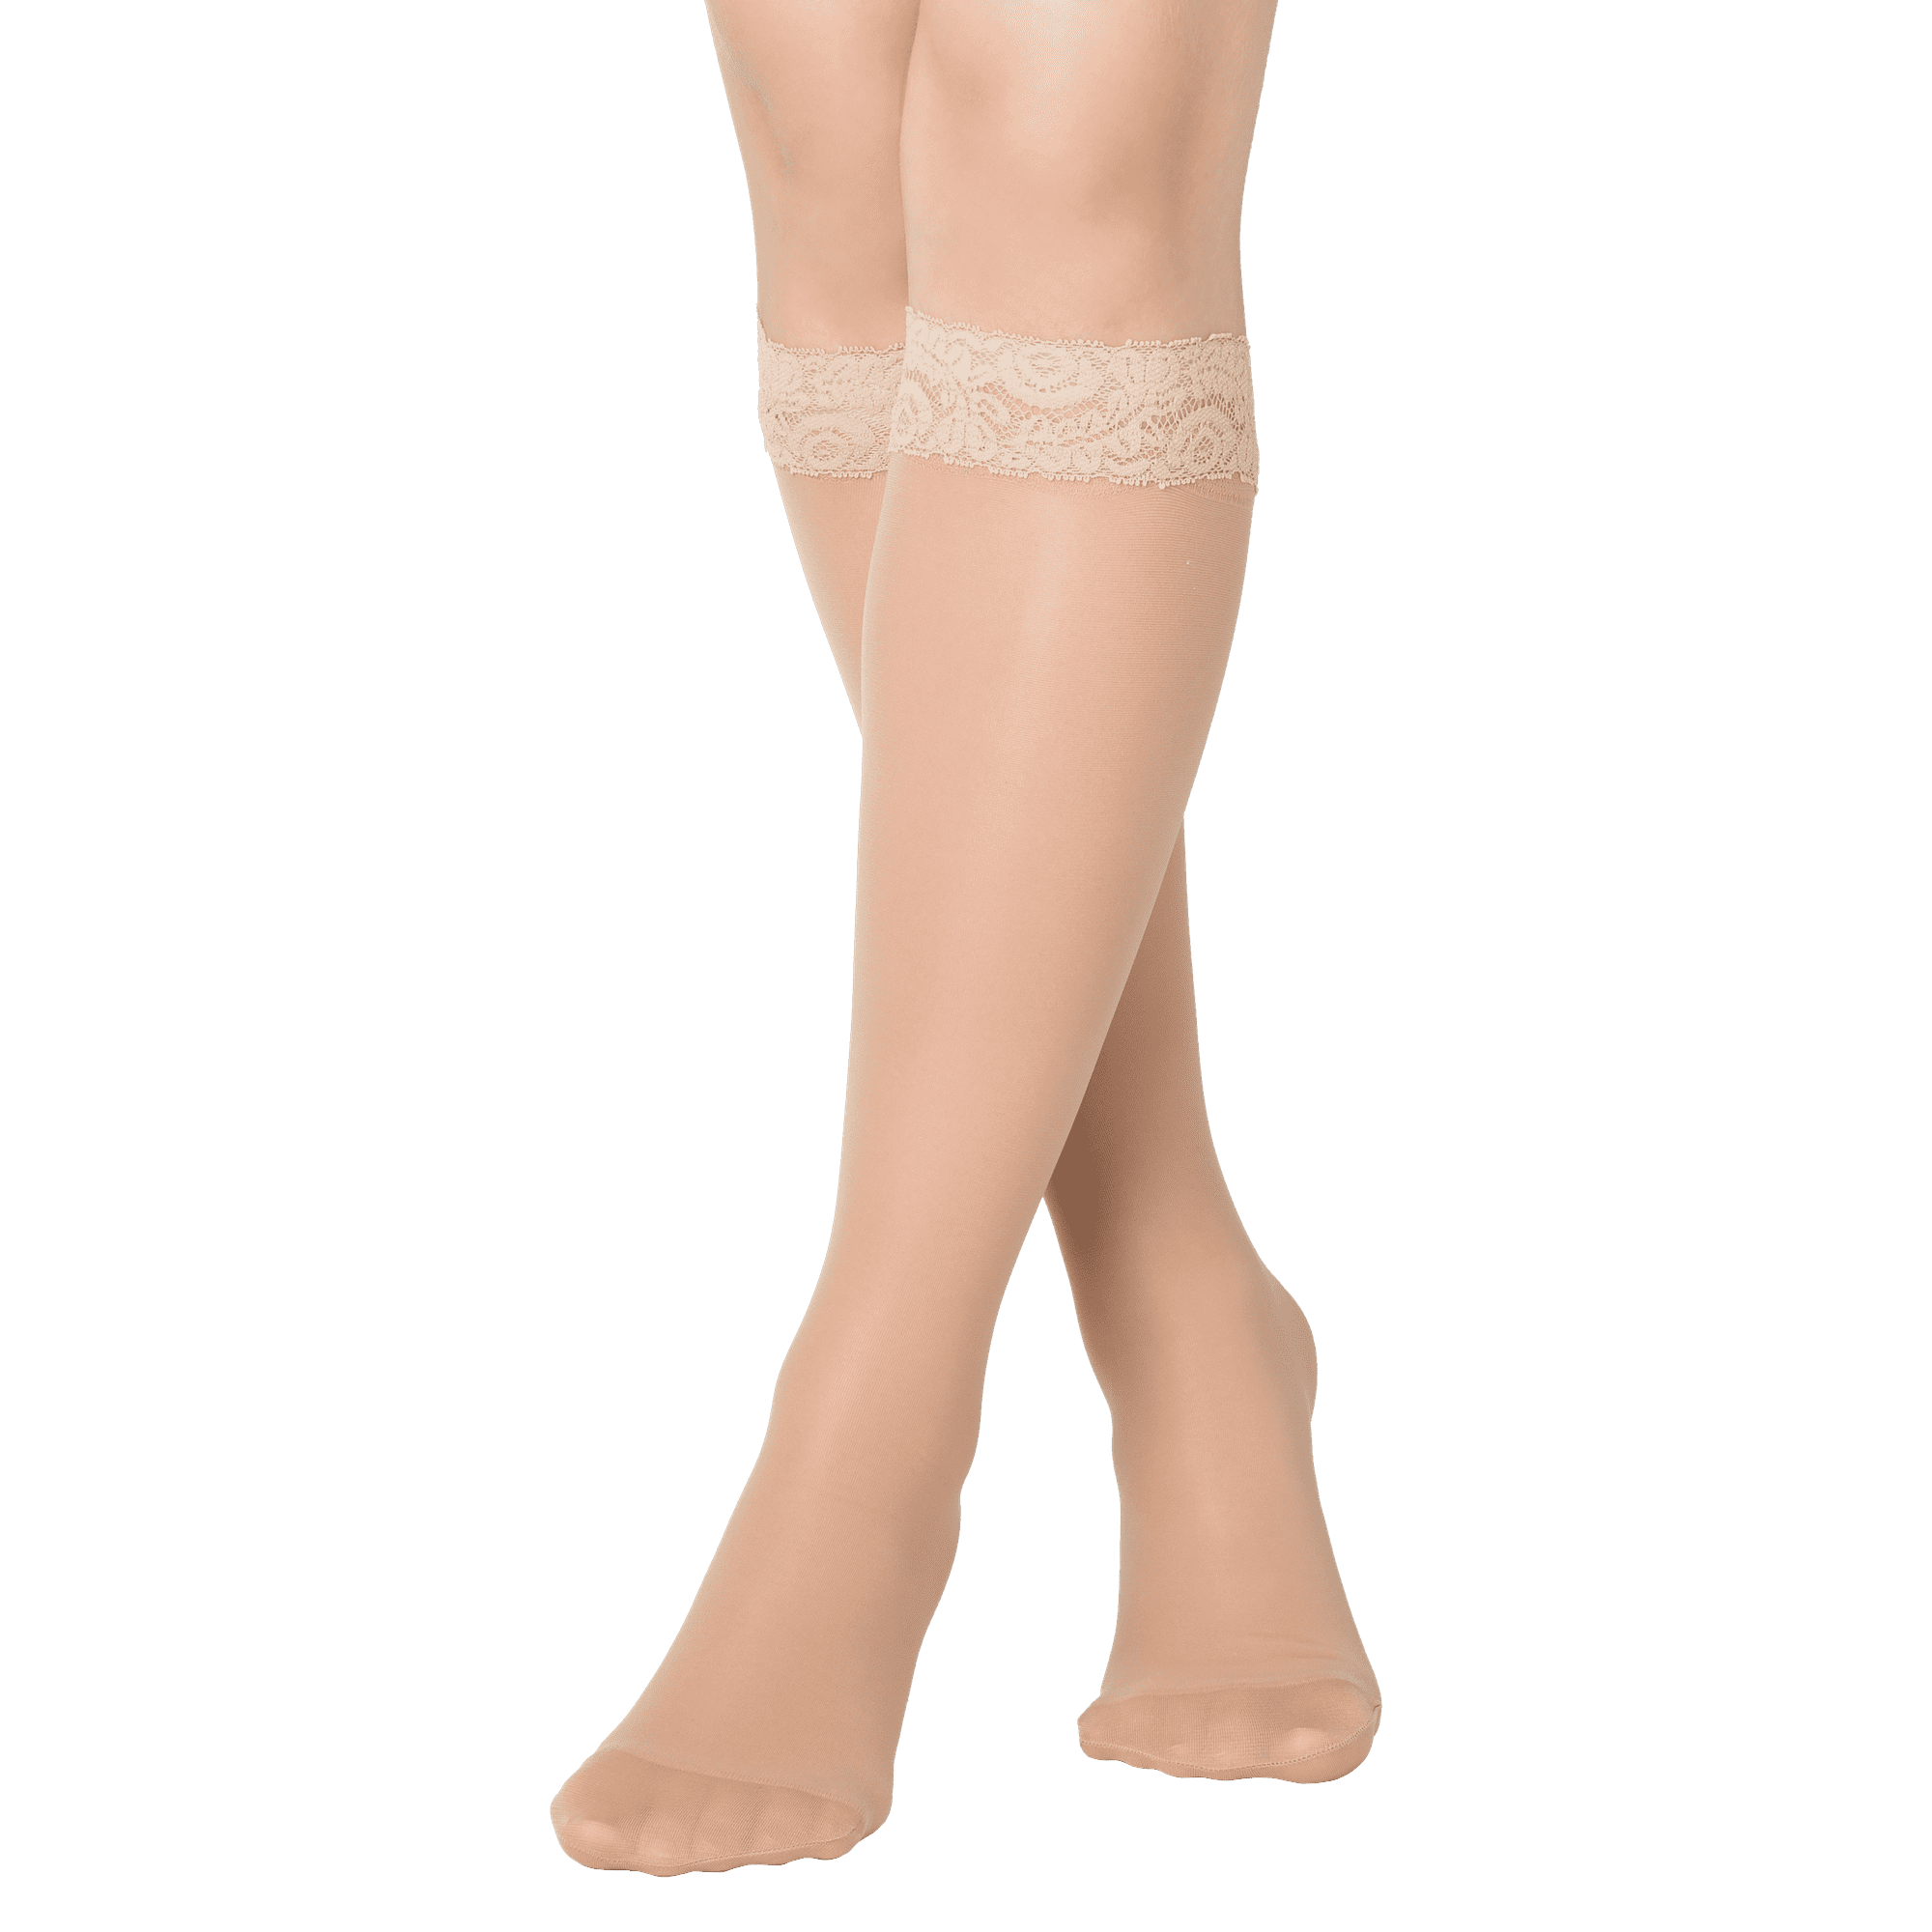 LACE SUPPORT STOCKINGS - Supreme skin